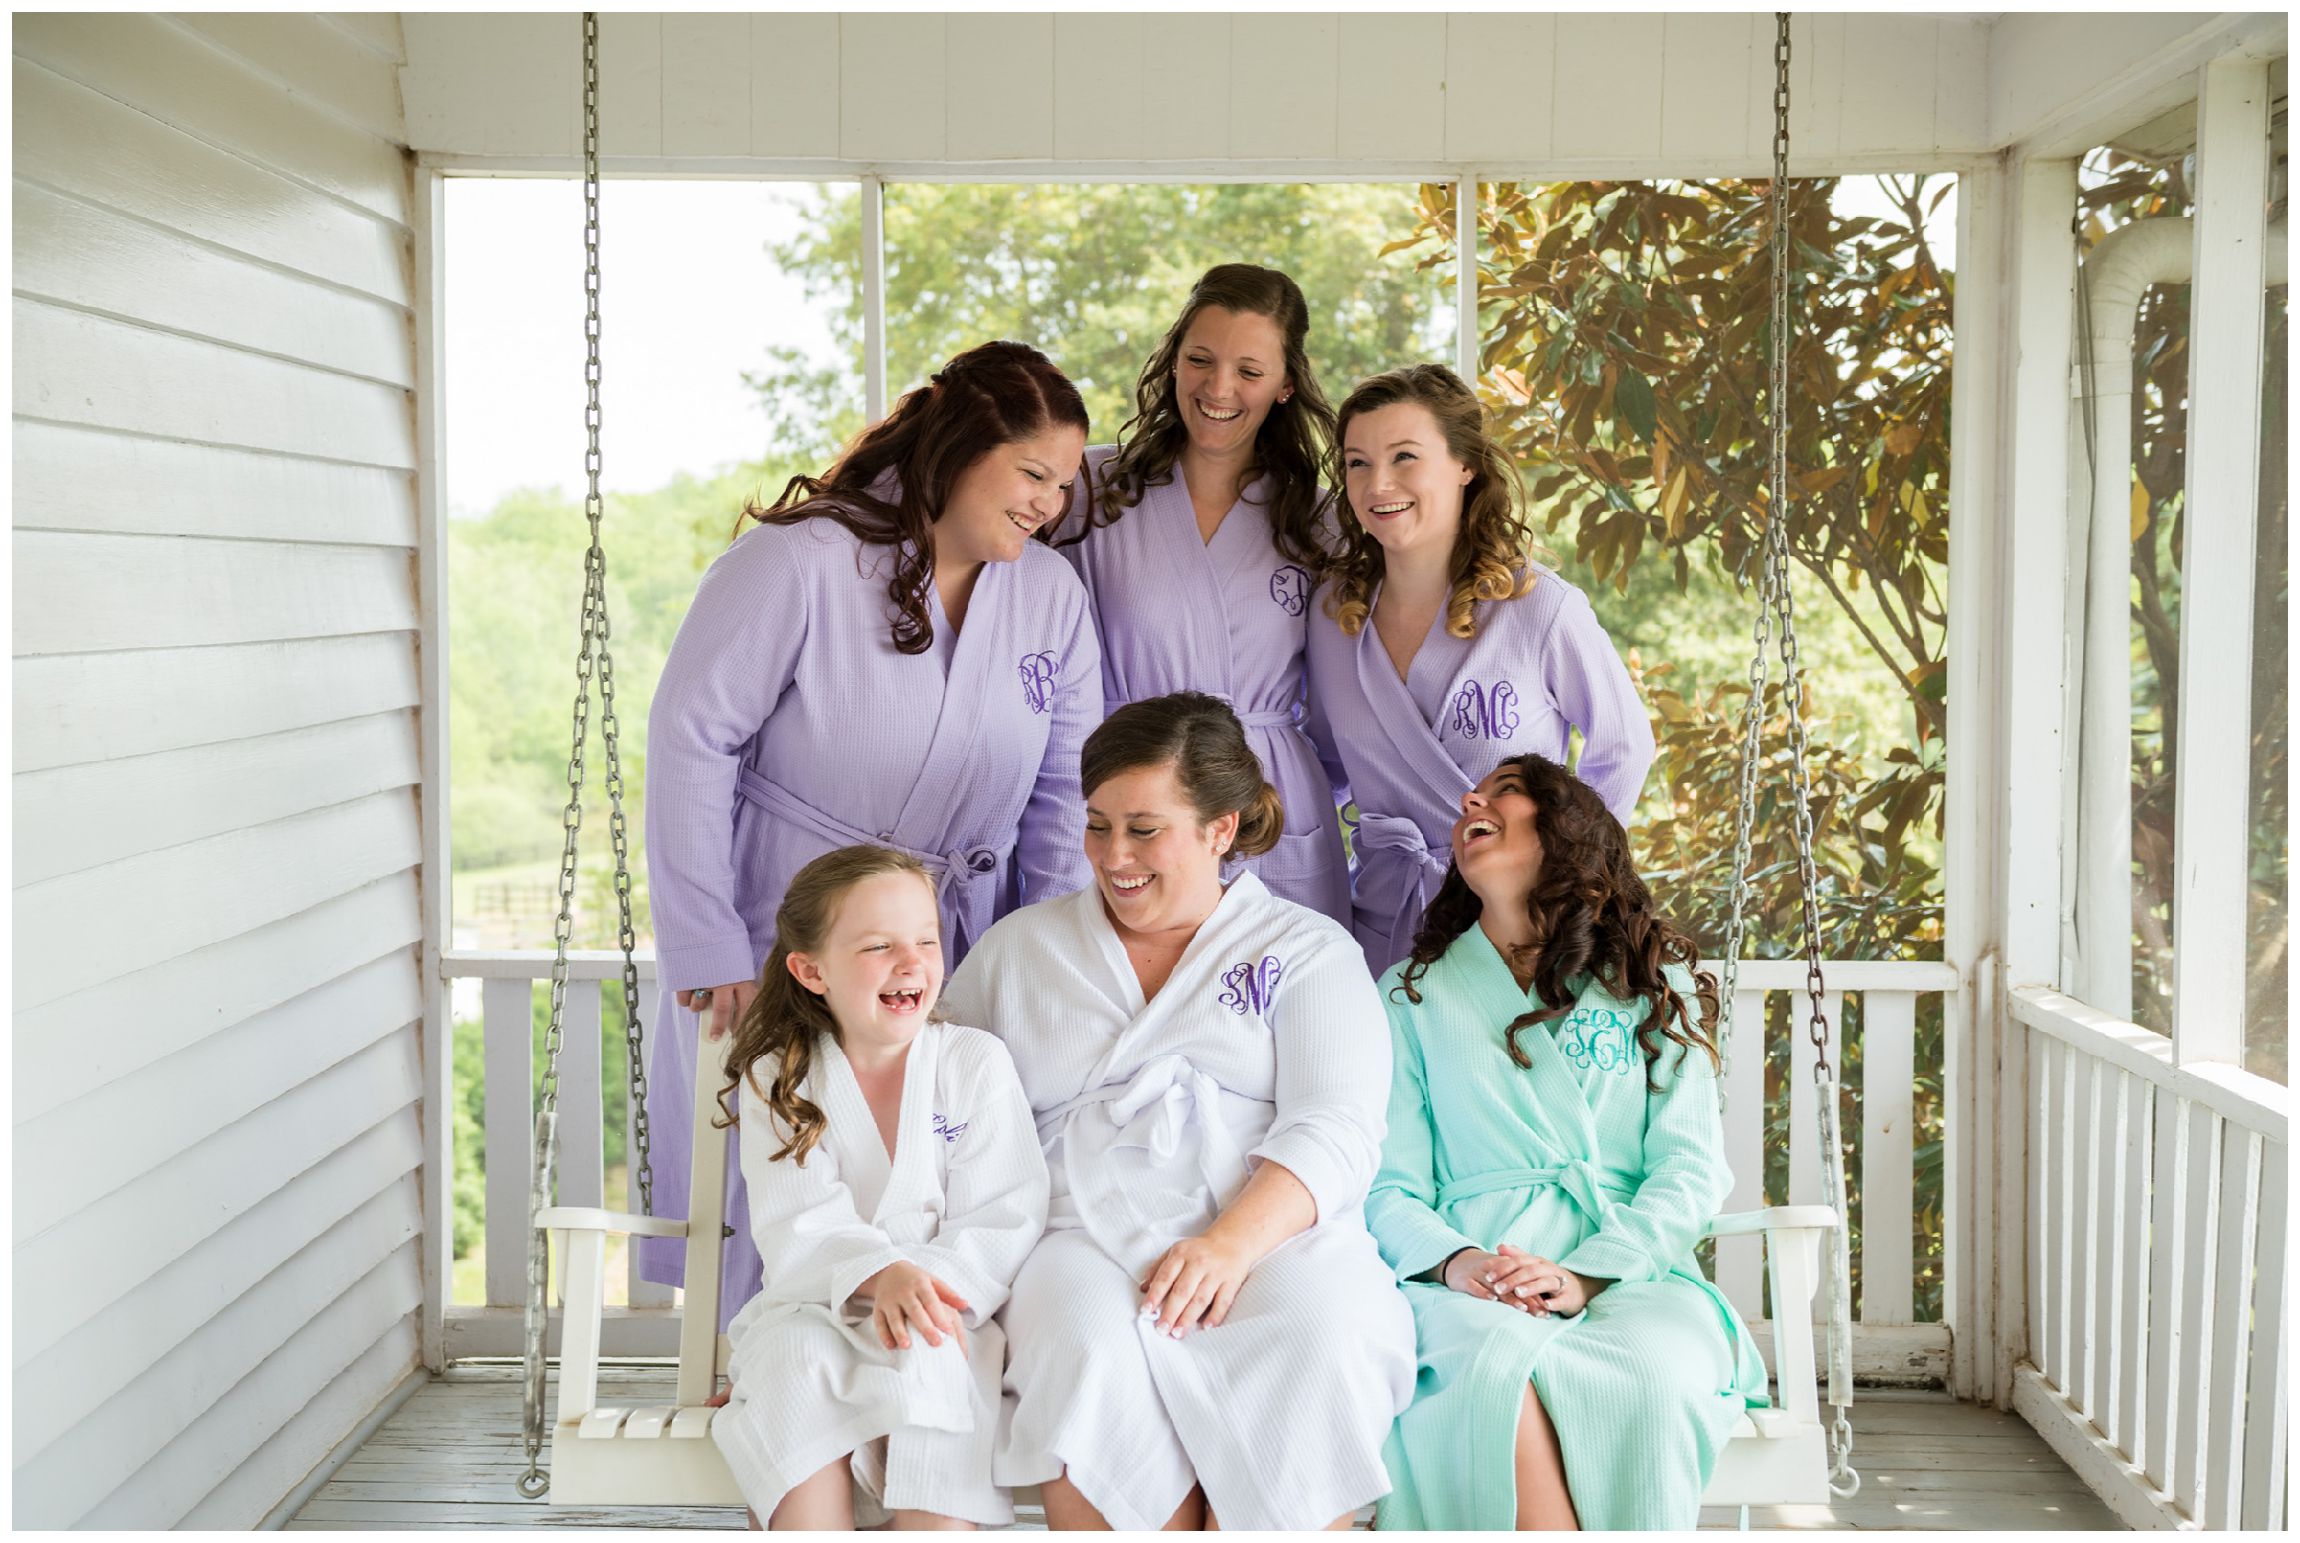 bride and bridesmaid laughing on farmhouse porch swing wearing matching robes